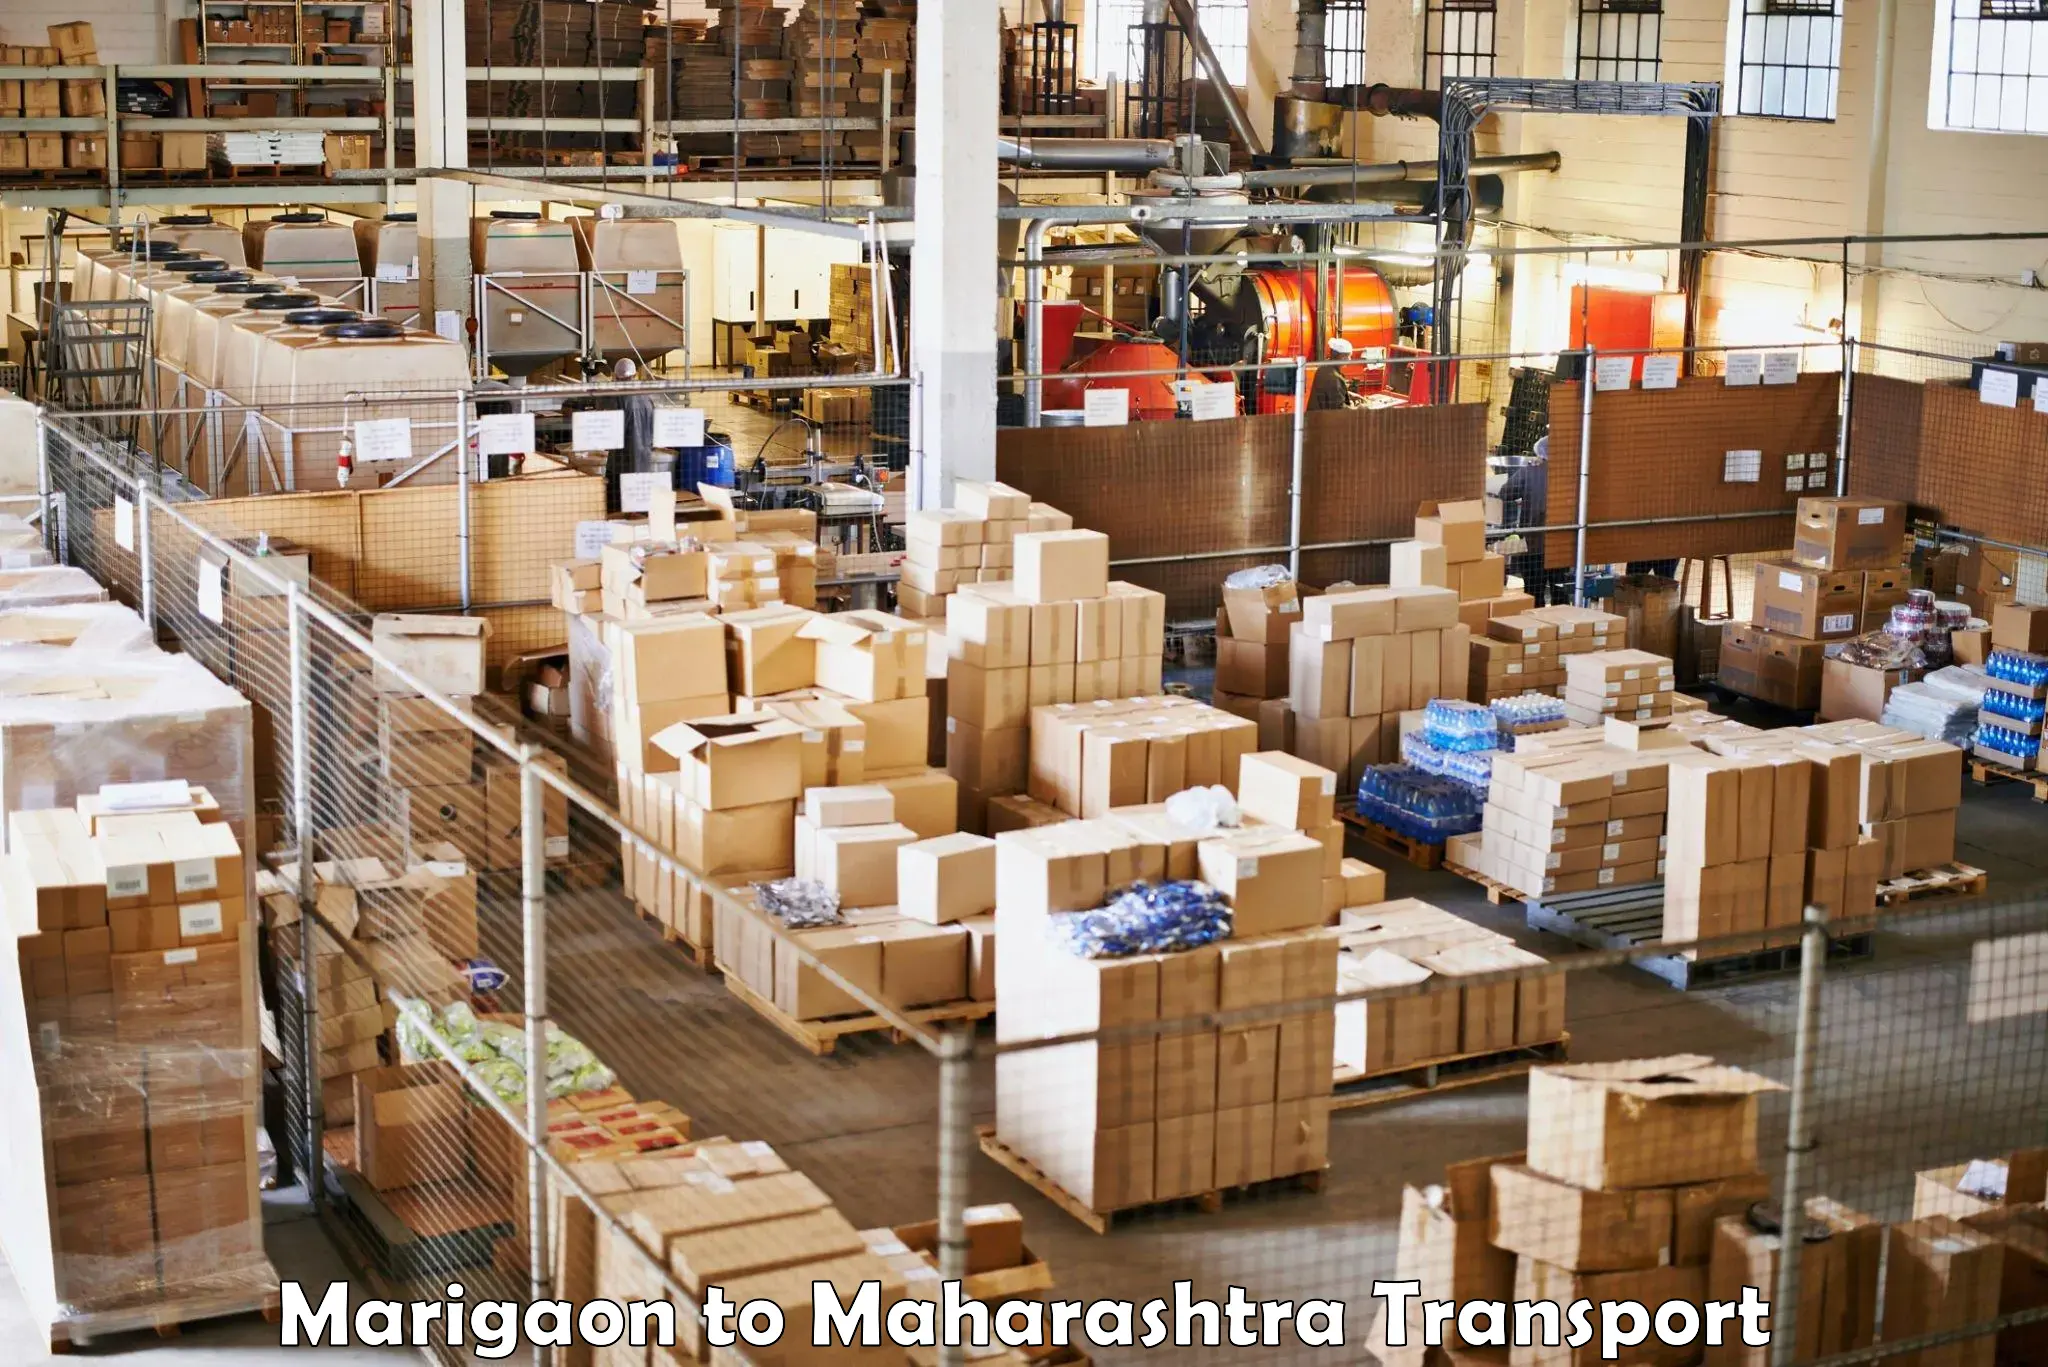 Air freight transport services Marigaon to Borivali